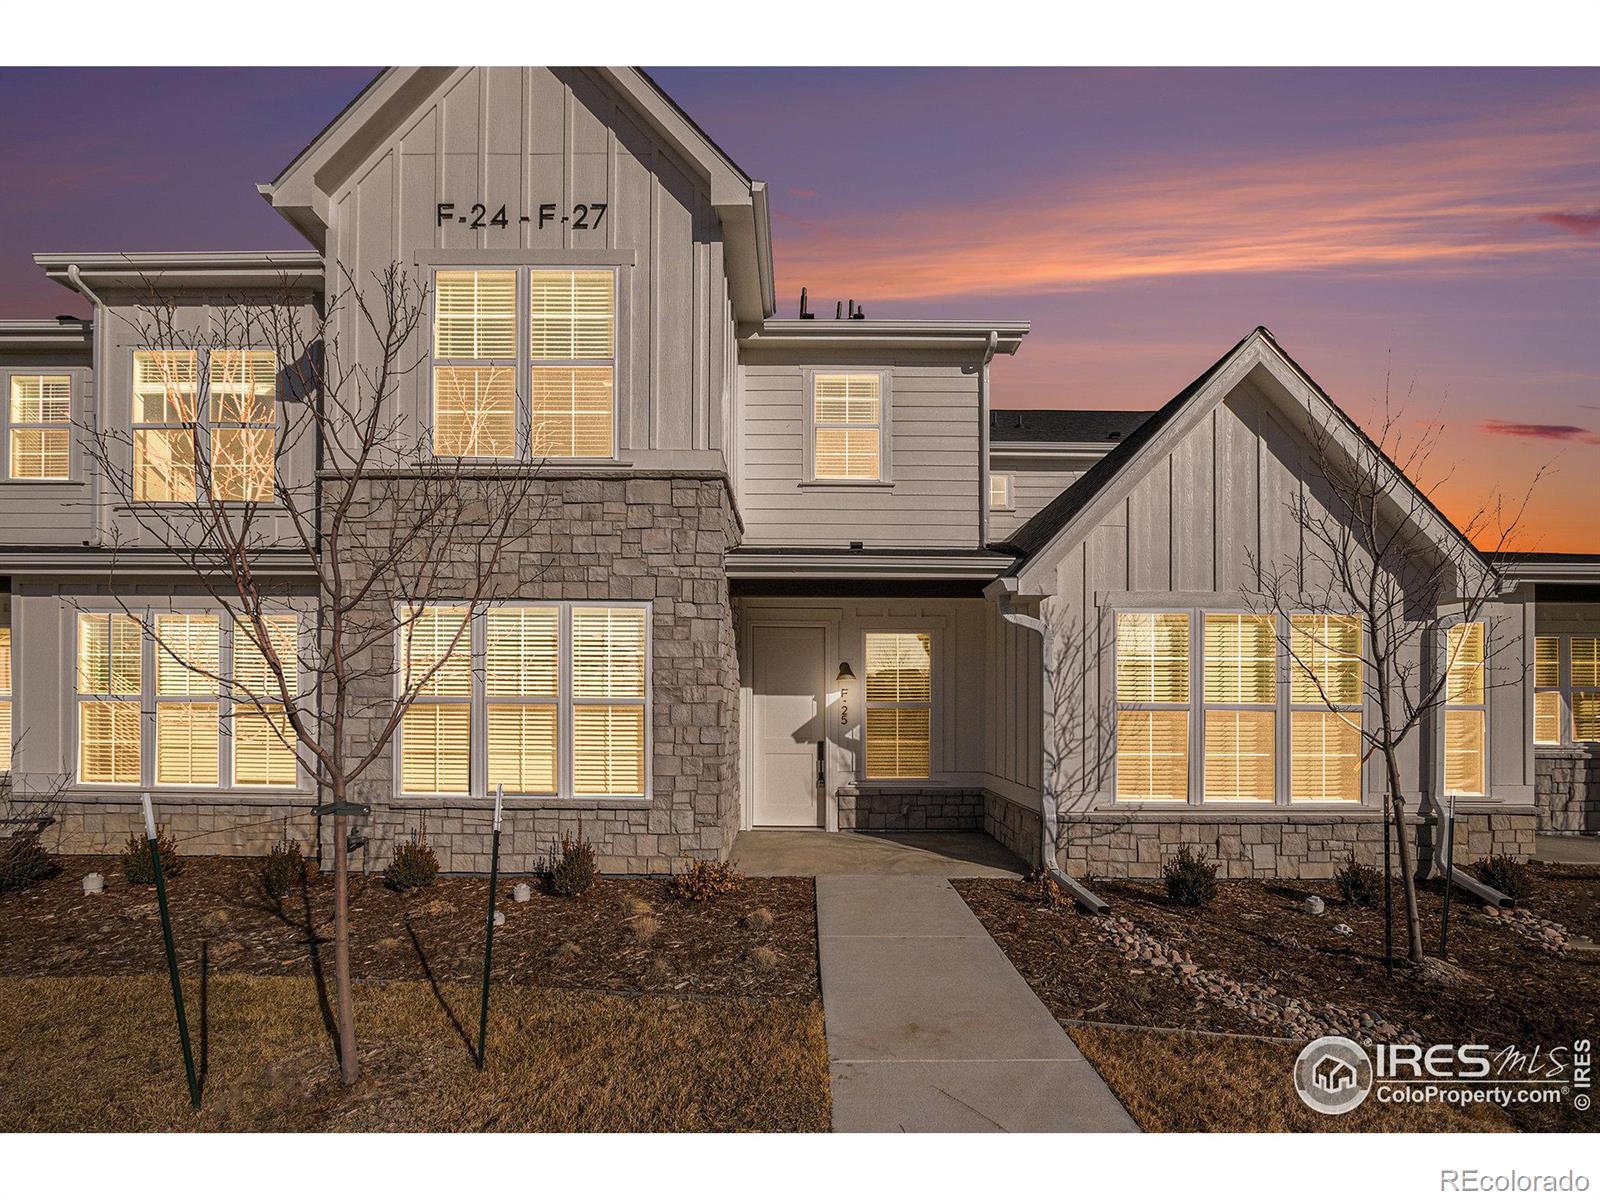 3045 E Trilby Road, fort collins MLS: 4567891006762 Beds: 3 Baths: 3 Price: $555,000